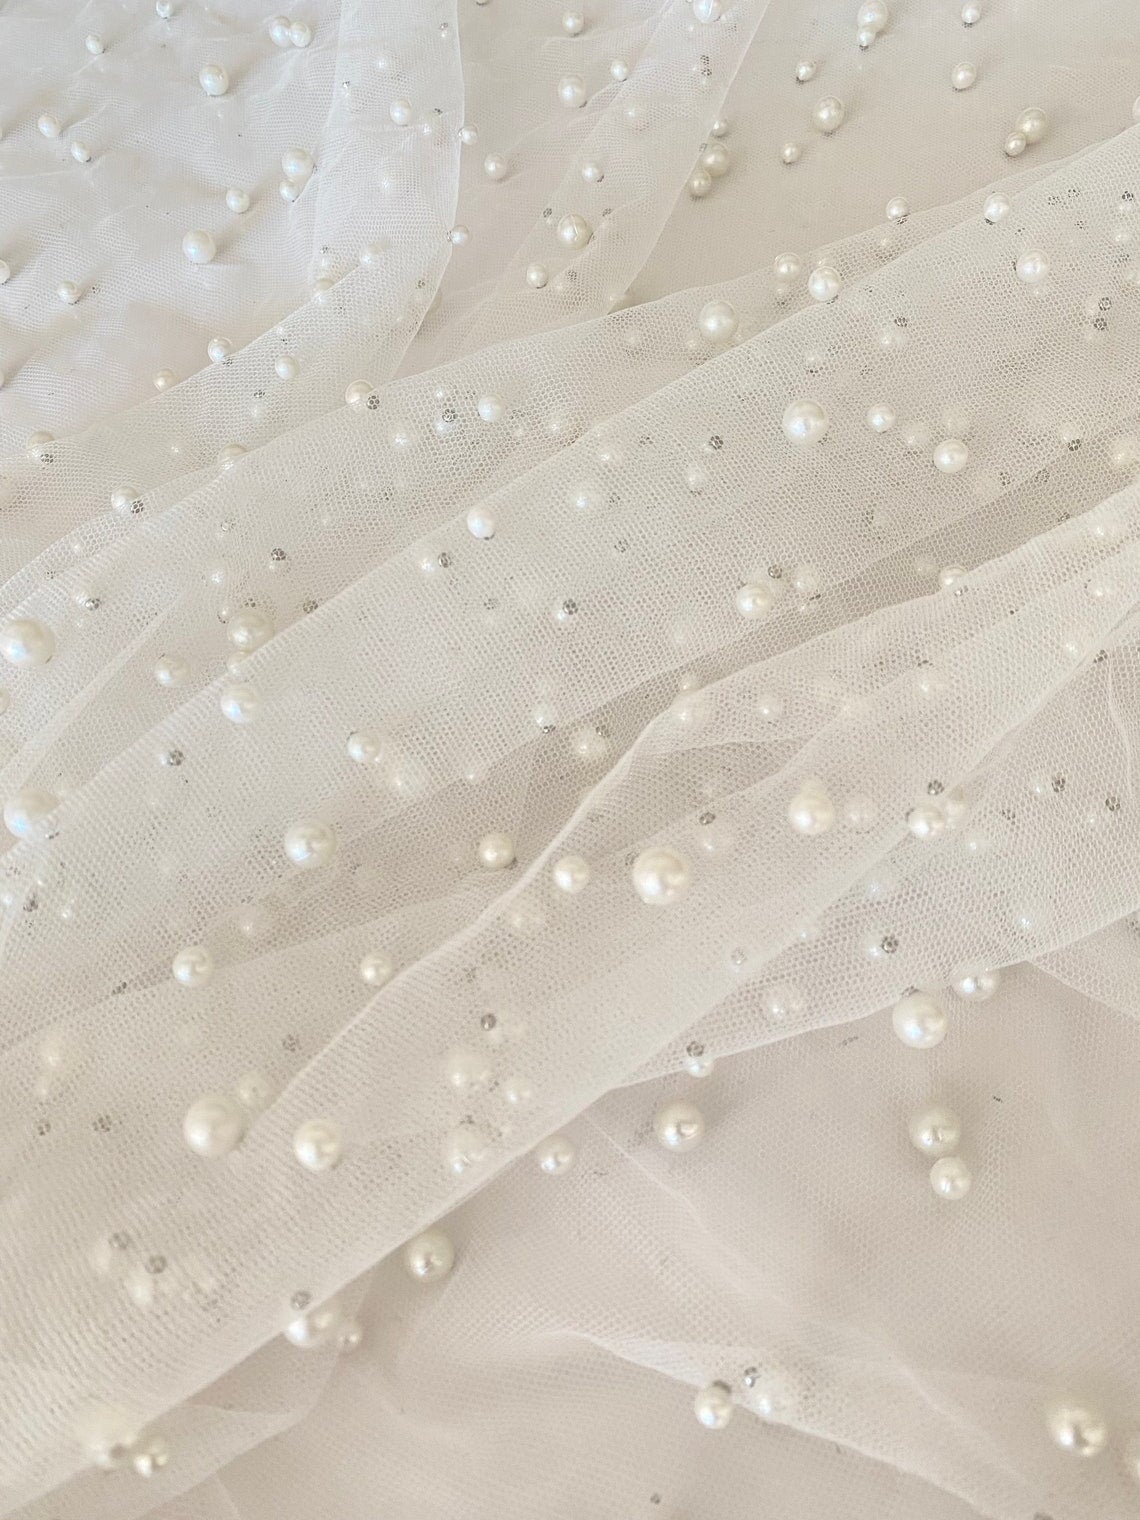 off white Pearl Tulle, white pearl Tulle, bright white pearl tulle, milky white Pearl Tulle, shinny Pearl Tulle, Pearl Tulle for woman, Pearl Tulle for bride, Pearl Tulle on discount, Pearl Tulle on sale, premium Pearl Tulle, buy Pearl Tulle online